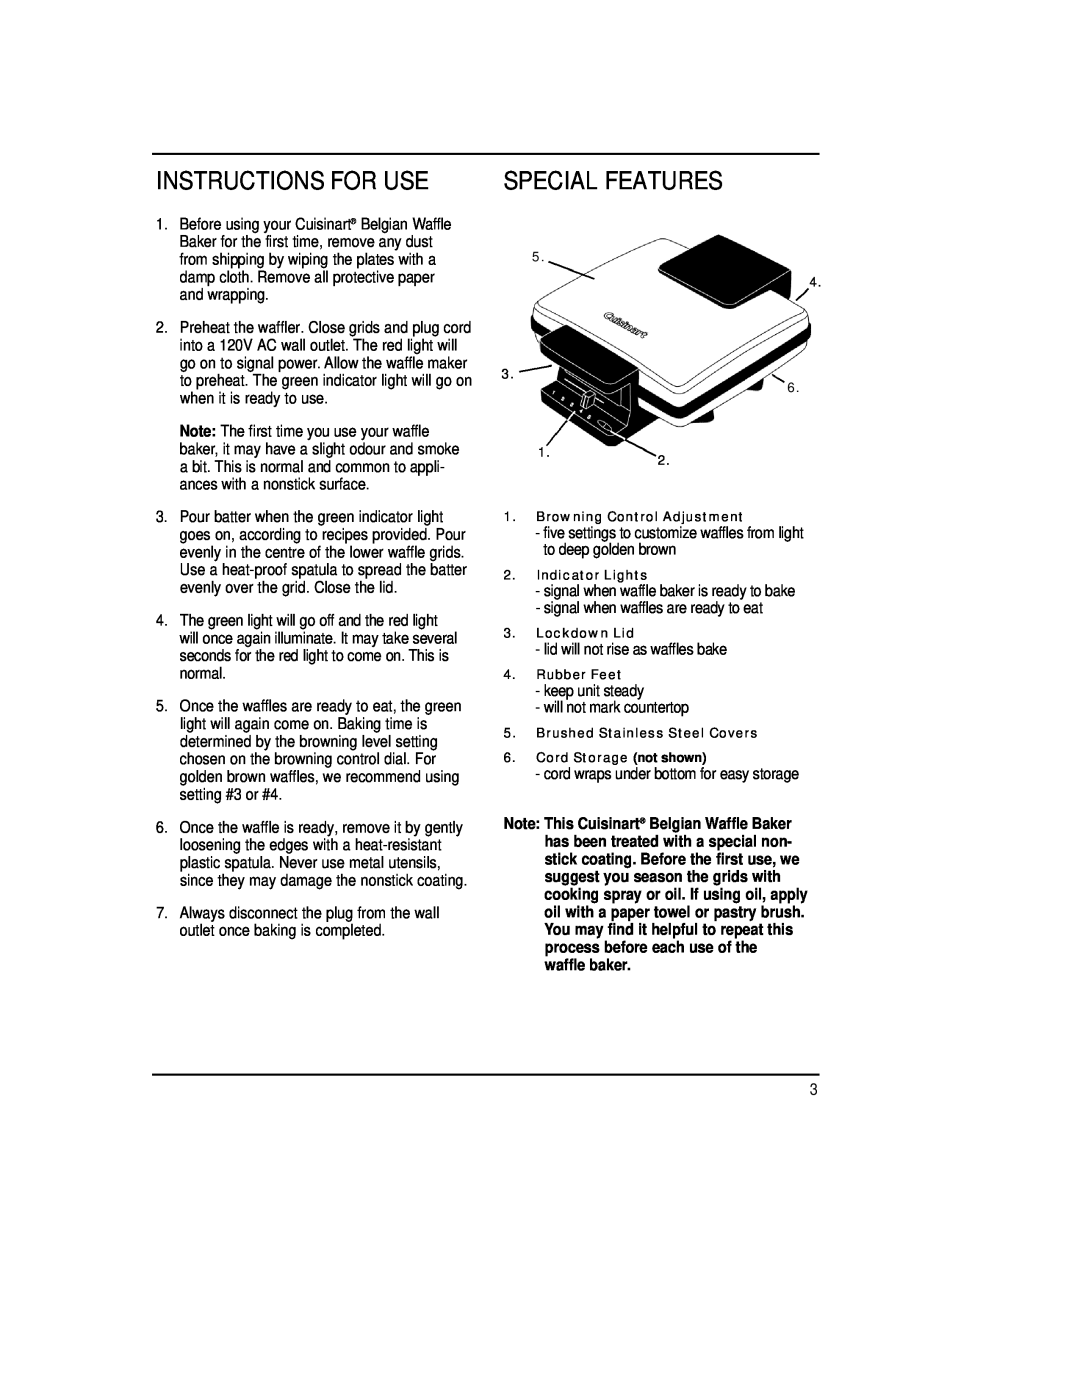 Cuisinart WMB-4AC manual Instructions For Use, Special Features 